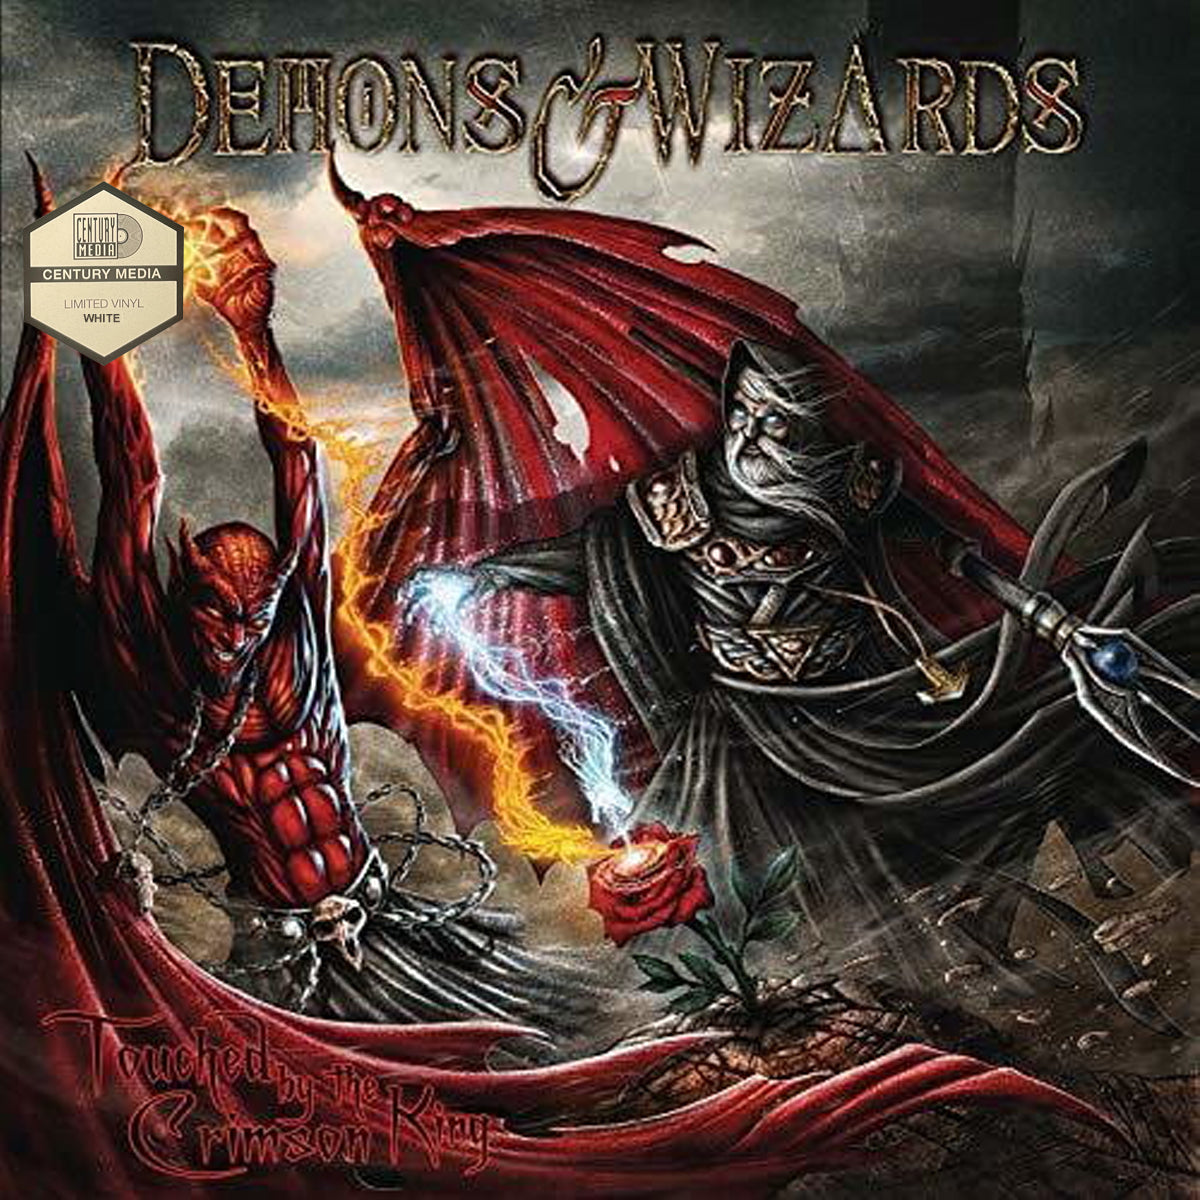 DEMONS & WIZARDS - Touched By The Crimson King Vinyl LP - White